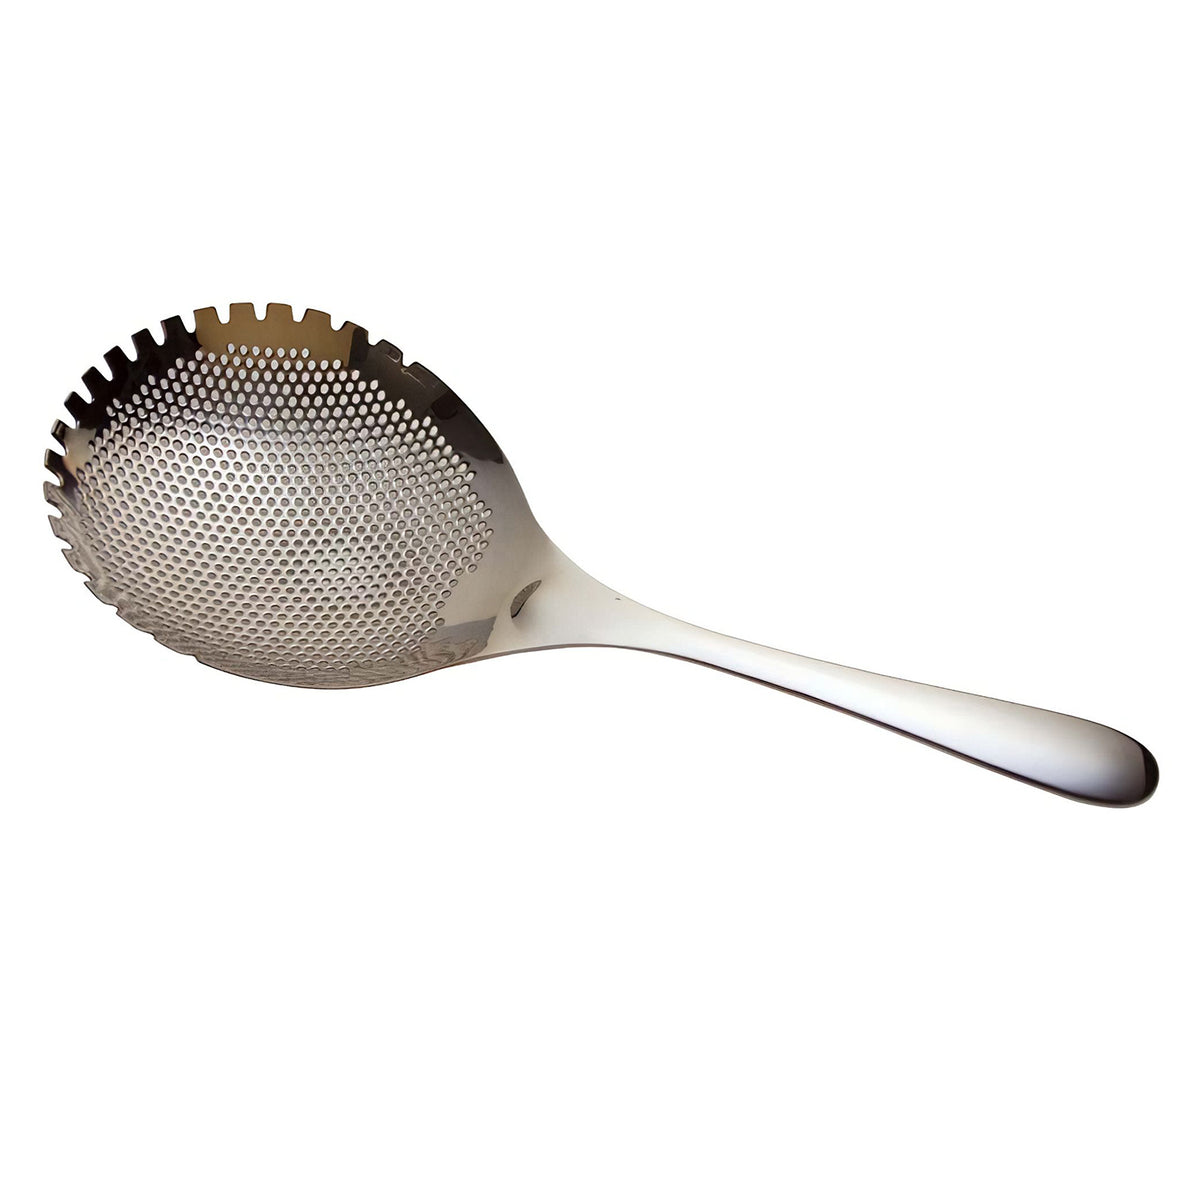 Nonoji Stainless Steel Ladle with Holes for Pasta